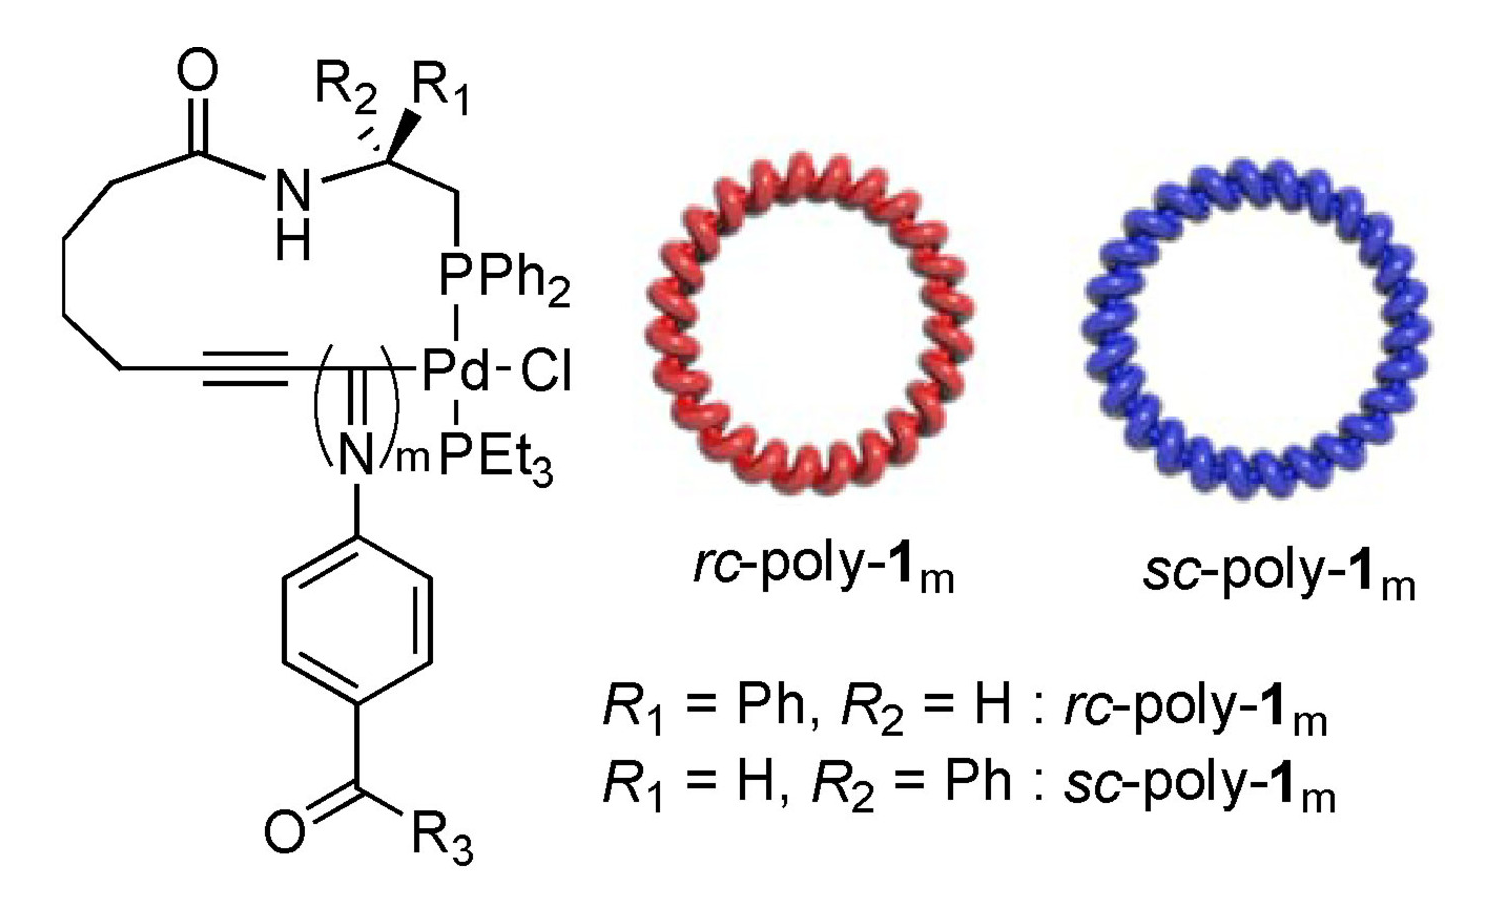 Controlled Synthesis of Cyclic Helical Polymers